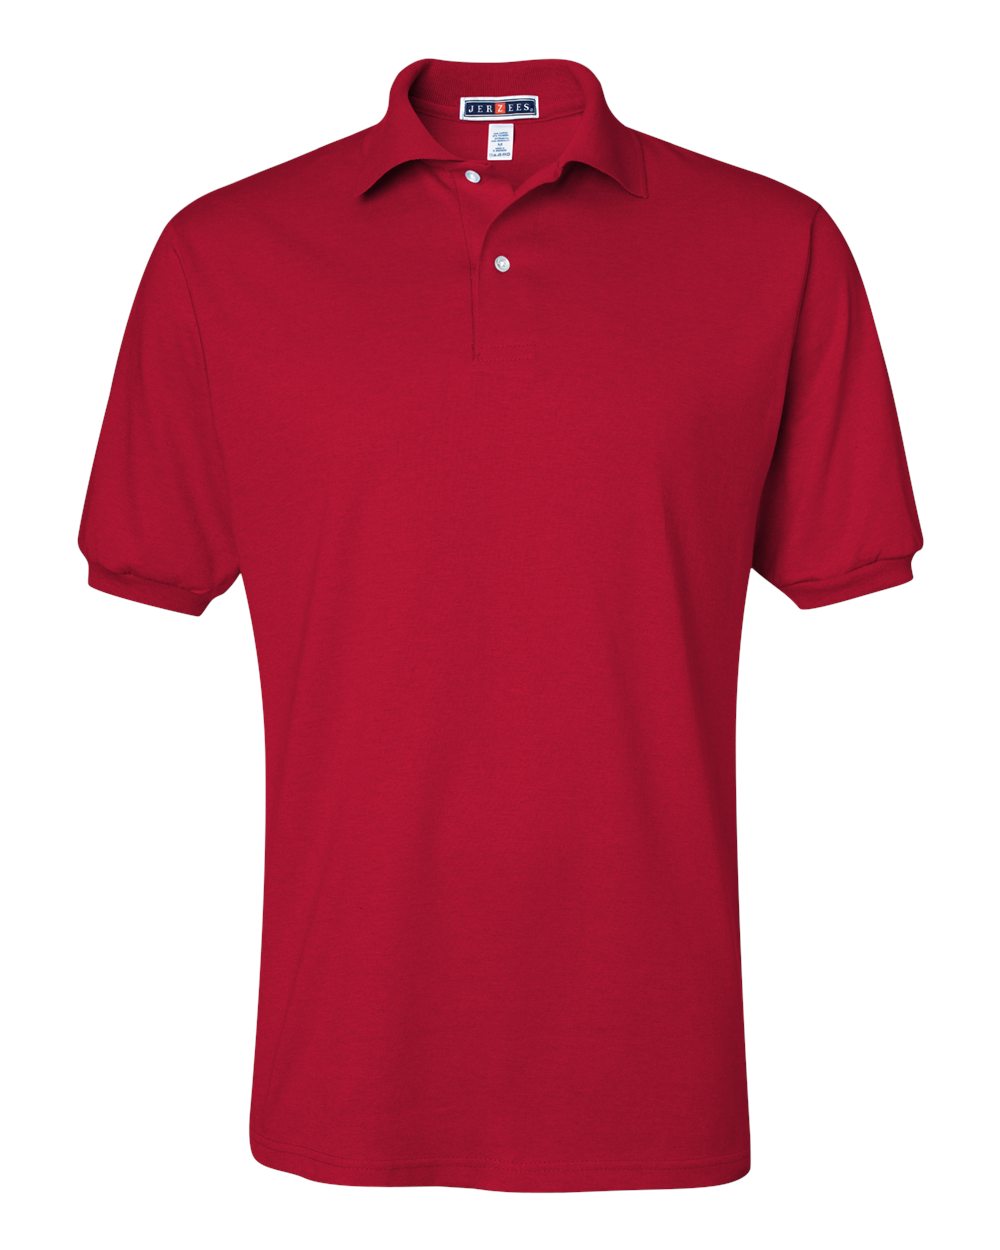 jerzees 50/50 polo true red